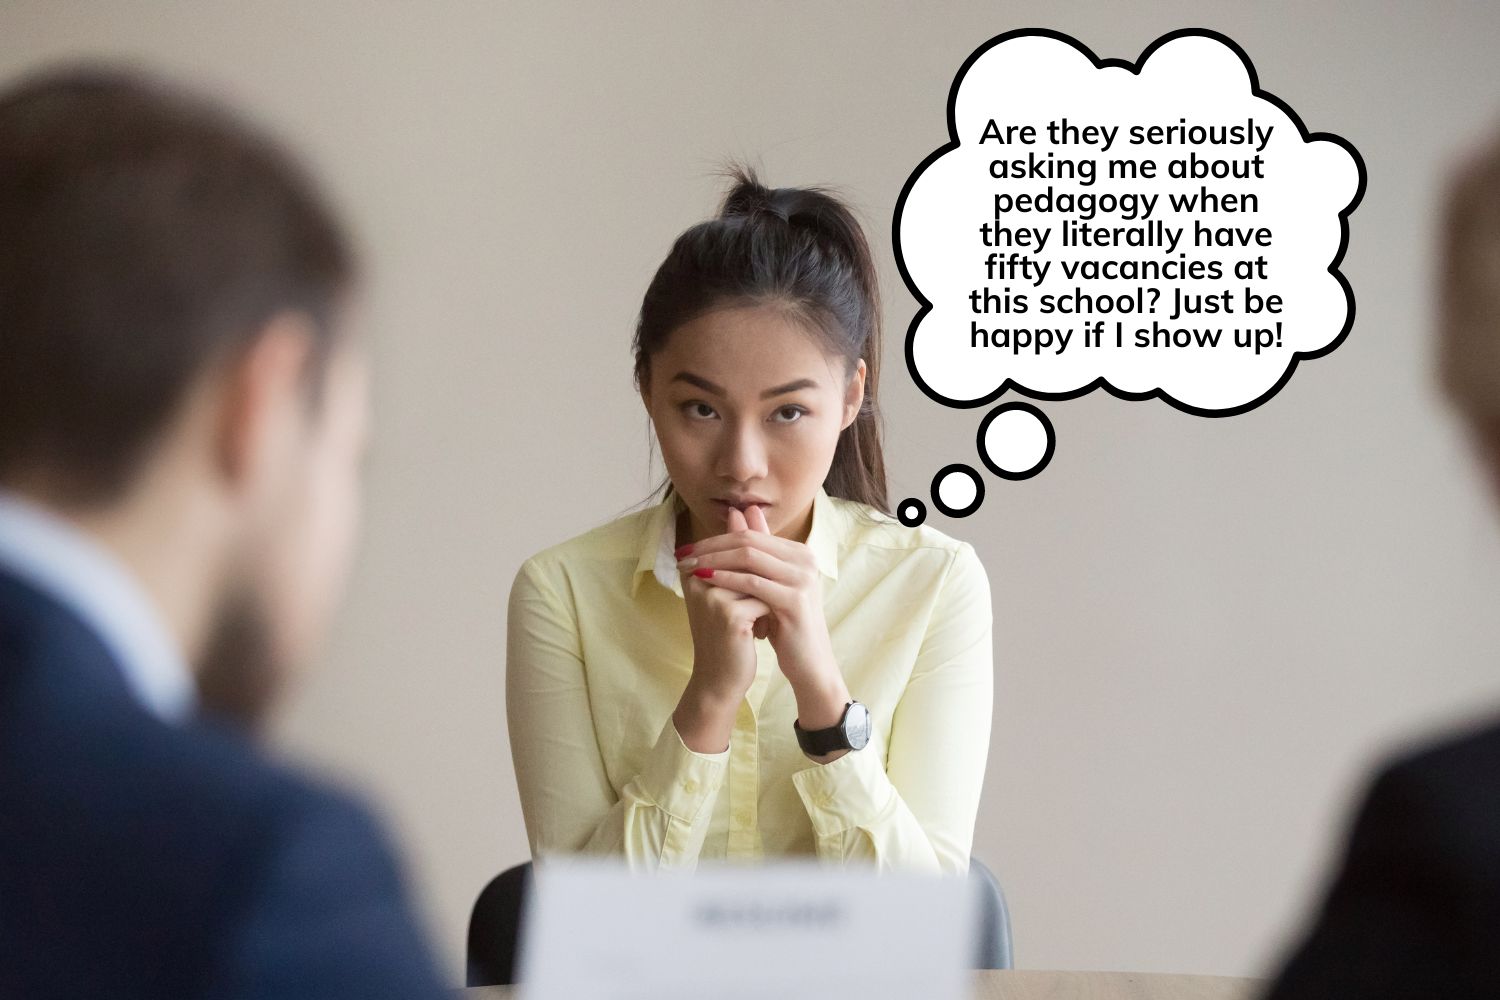 Teacher in an interview wondering why they are asking questions about pedagogy when they are in desperate need of teachers.